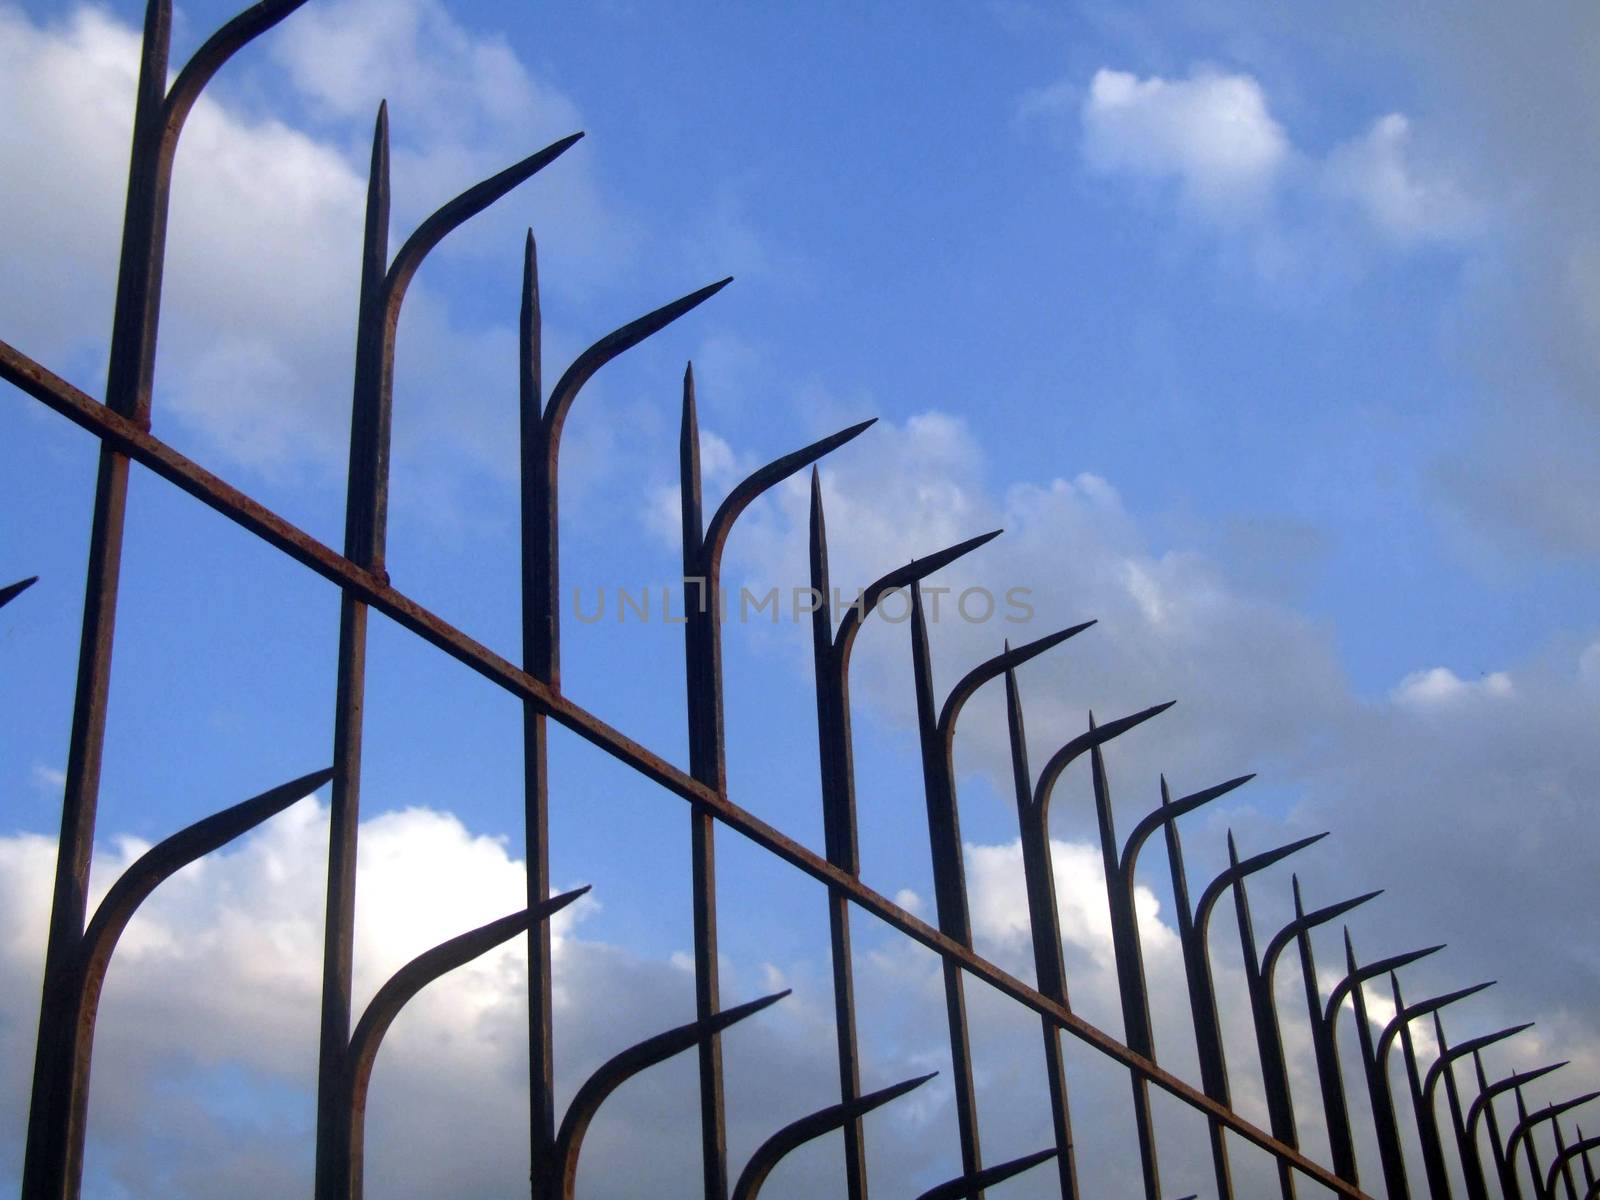 Iron Fence Wall in Prison by e22xua